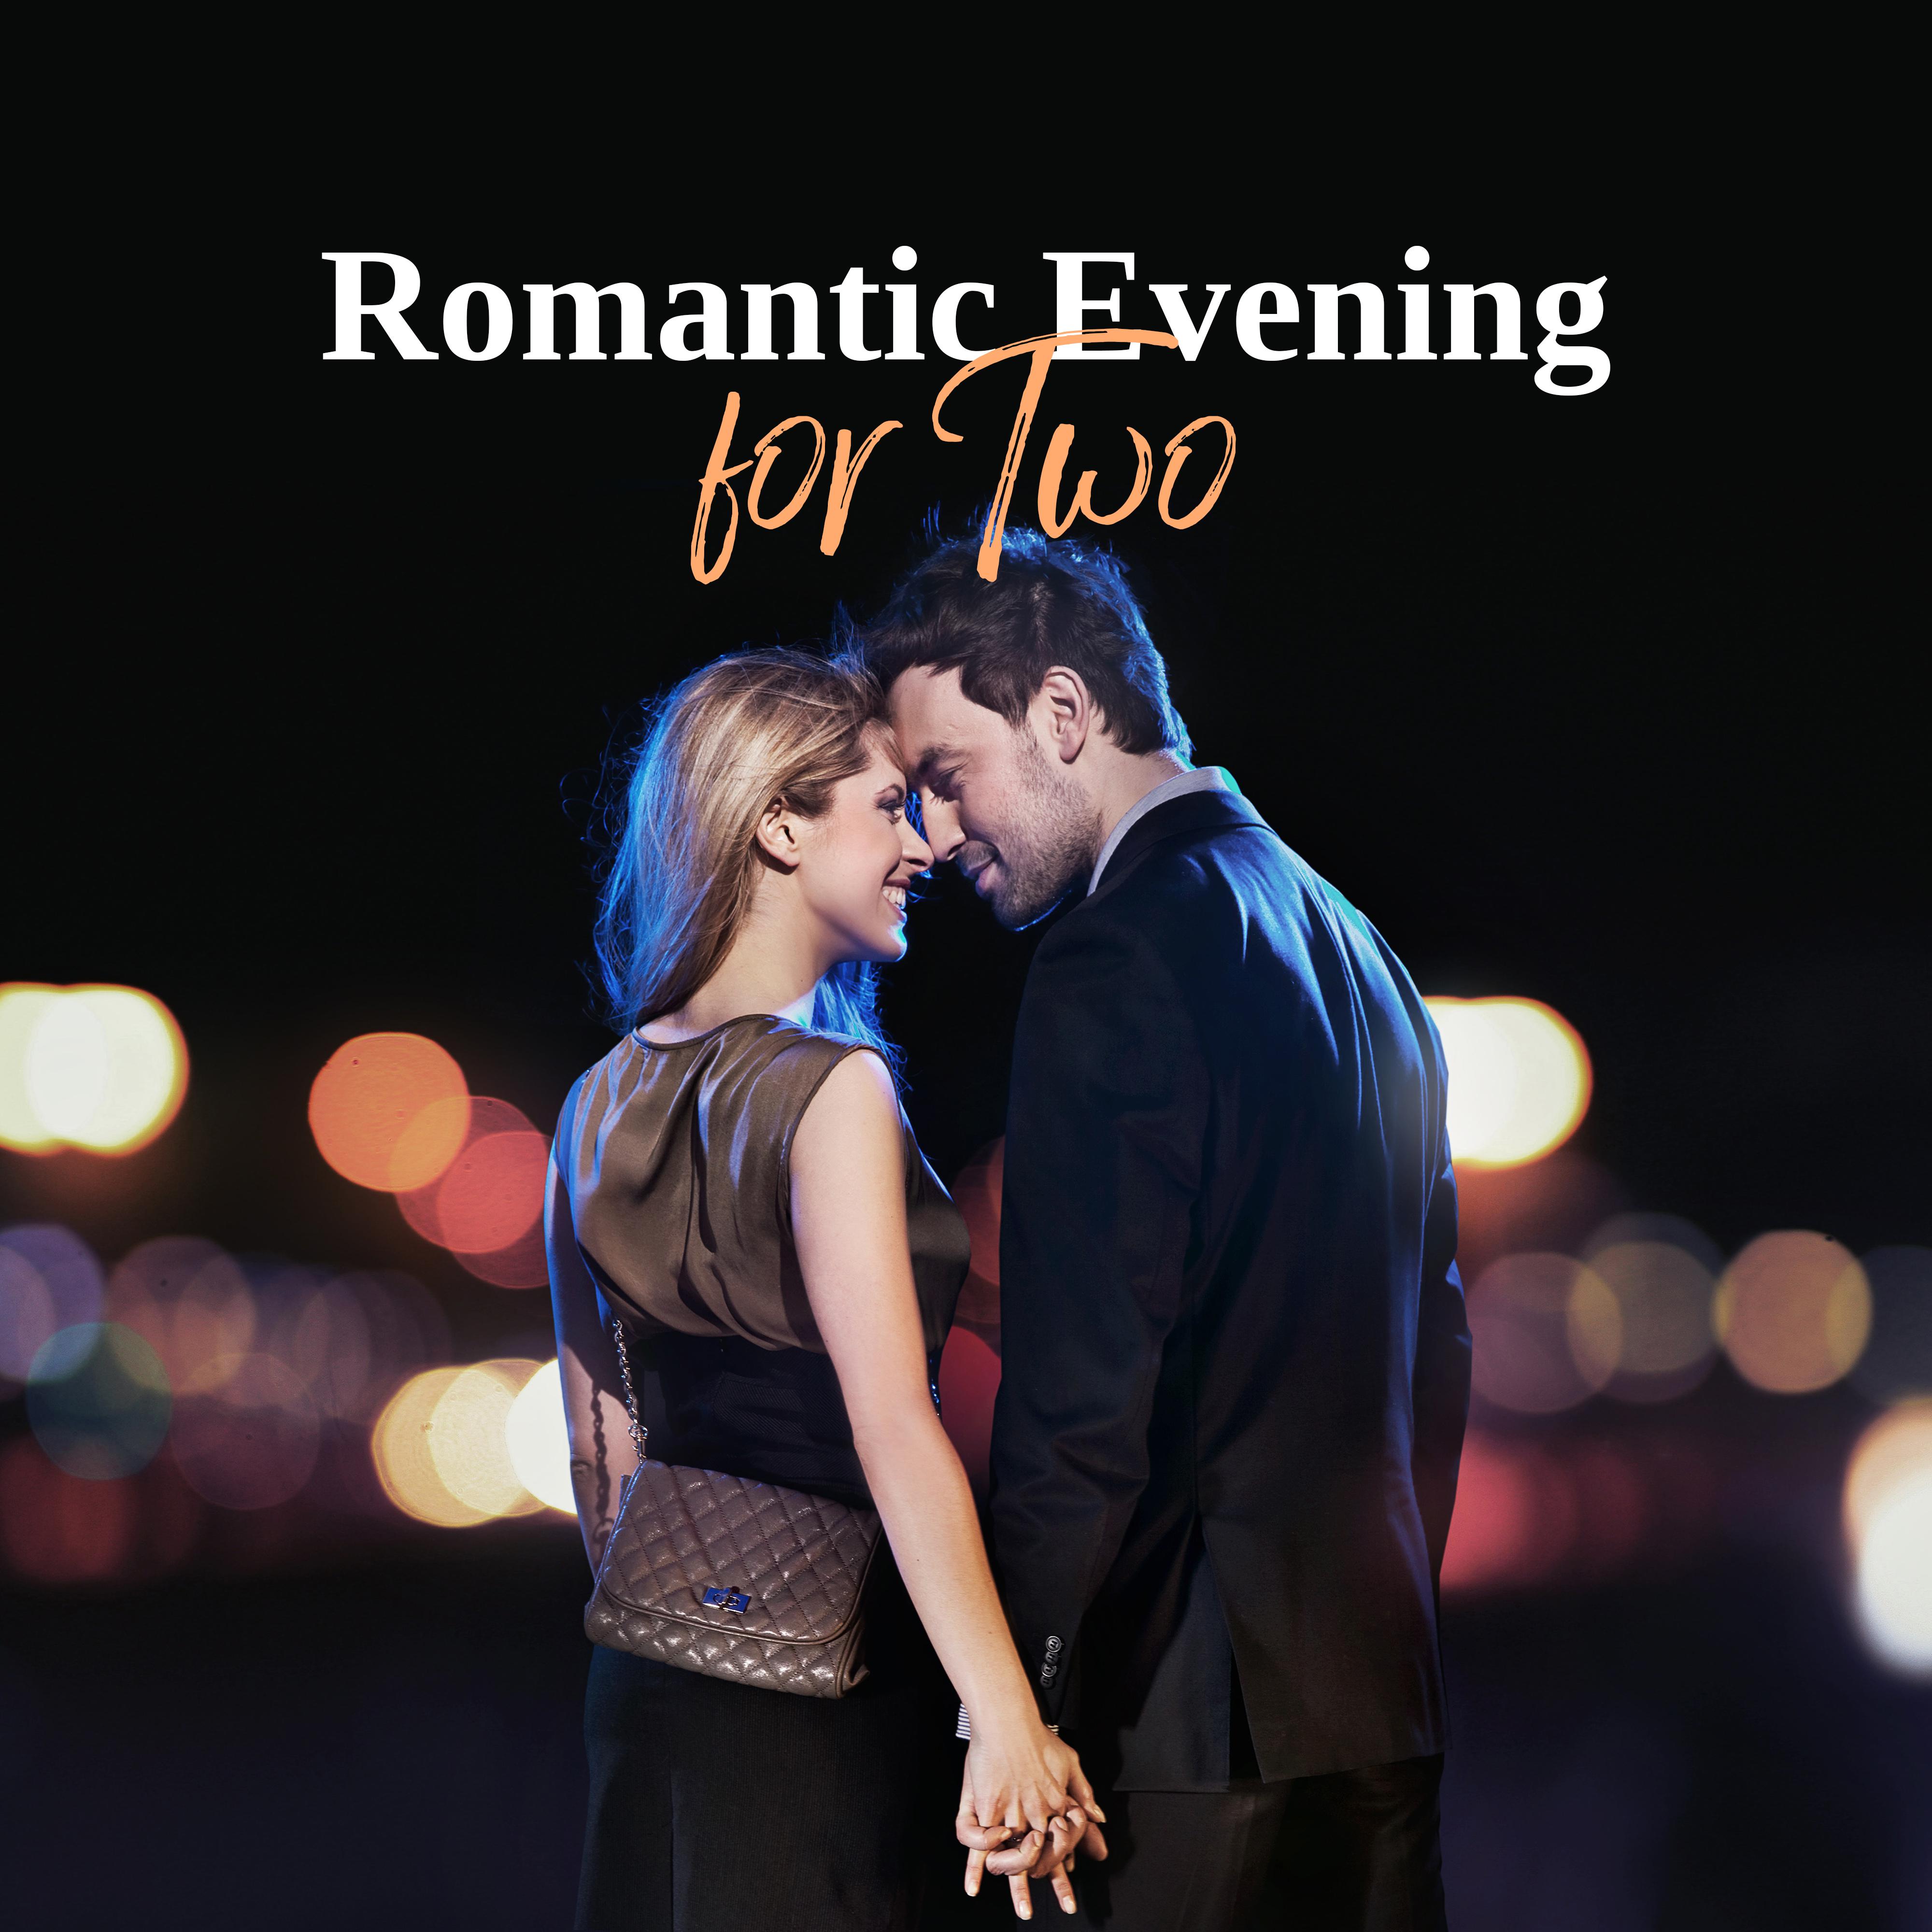 Romantic Evening for Two: 15 Smooth Instrumental Jazz Songs for Couple, Nice Restaurant Dinner & Champagne Time Together